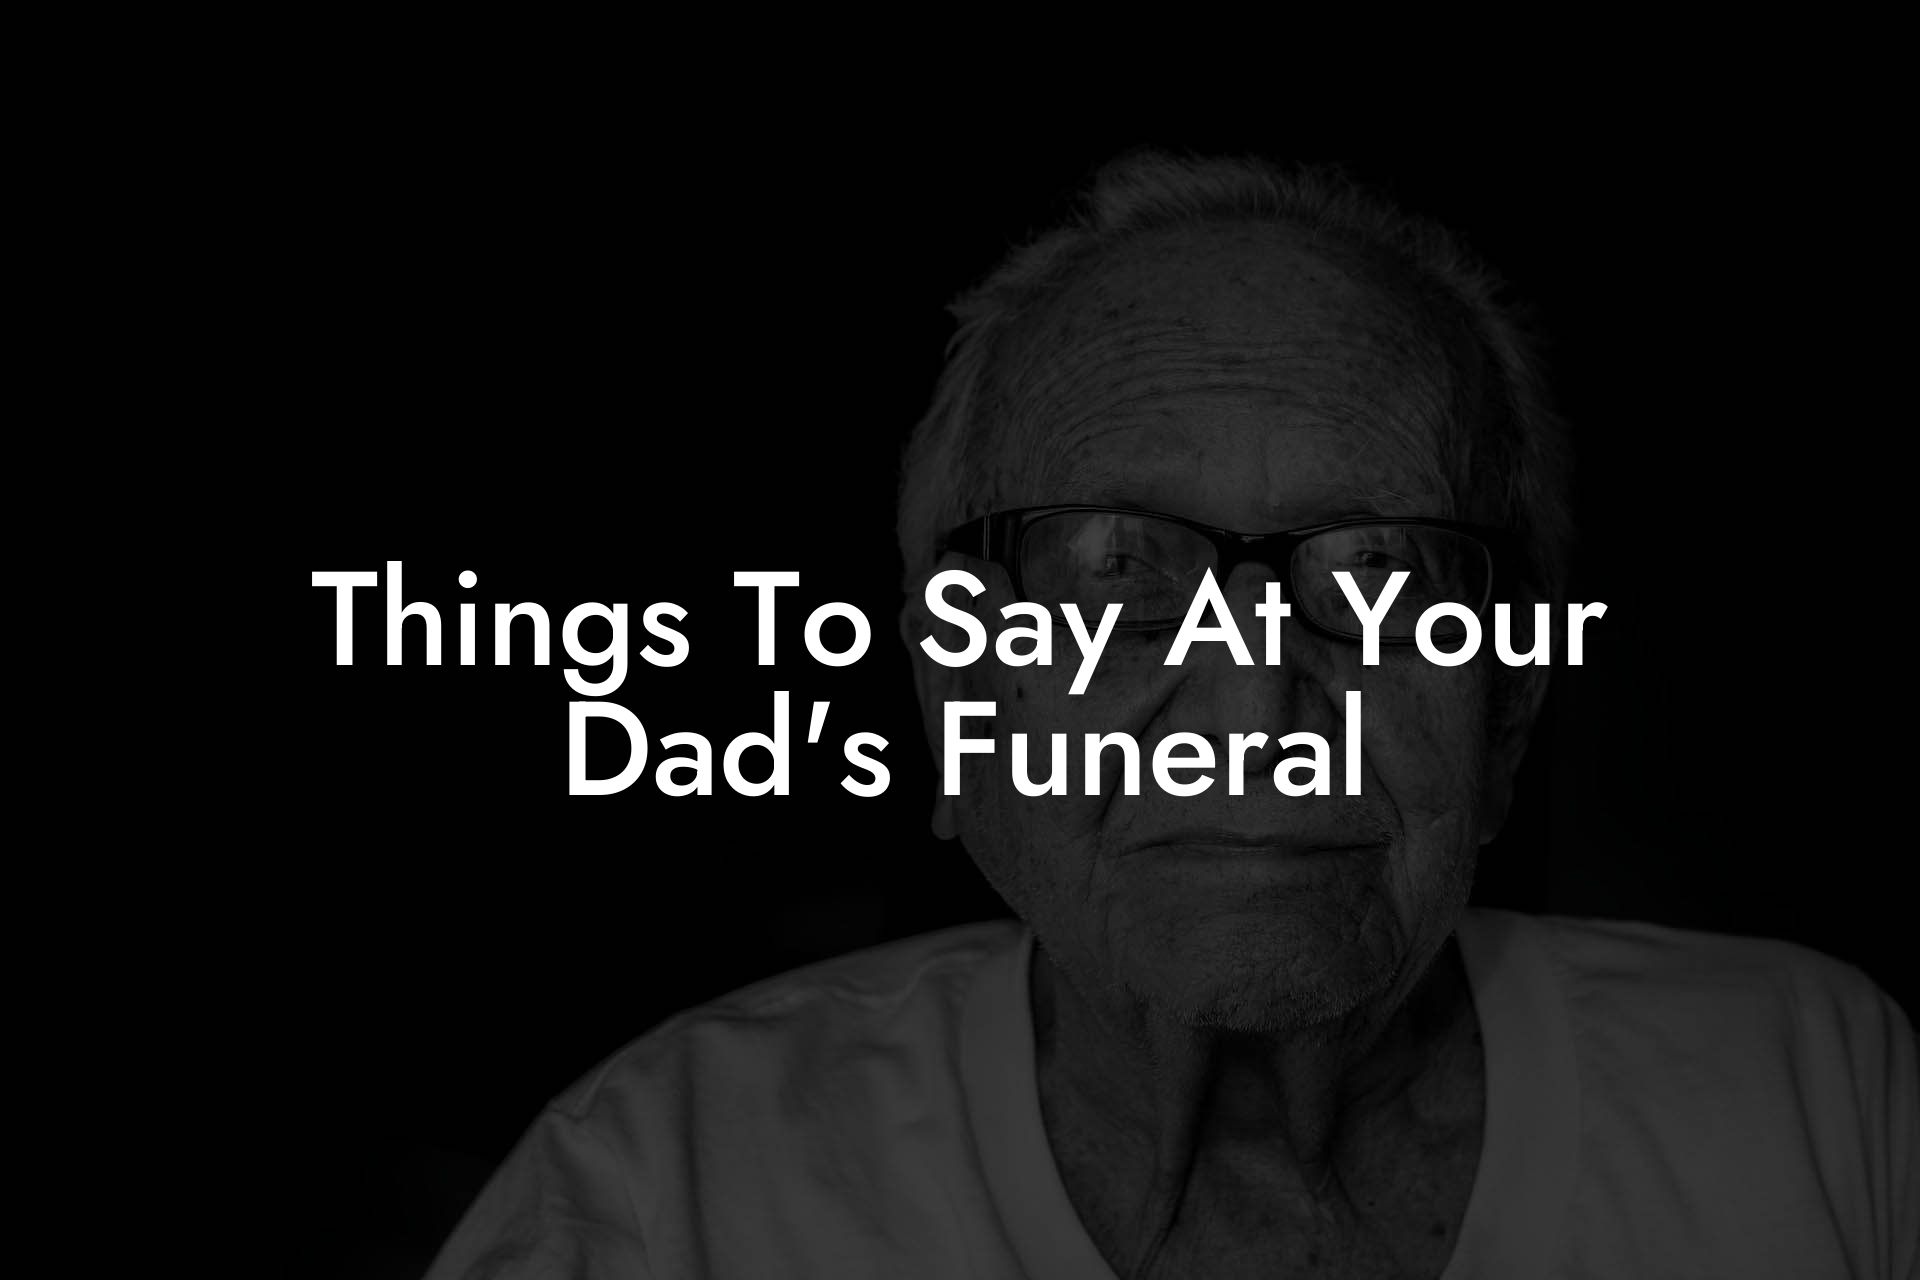 Things To Say At Your Dad's Funeral